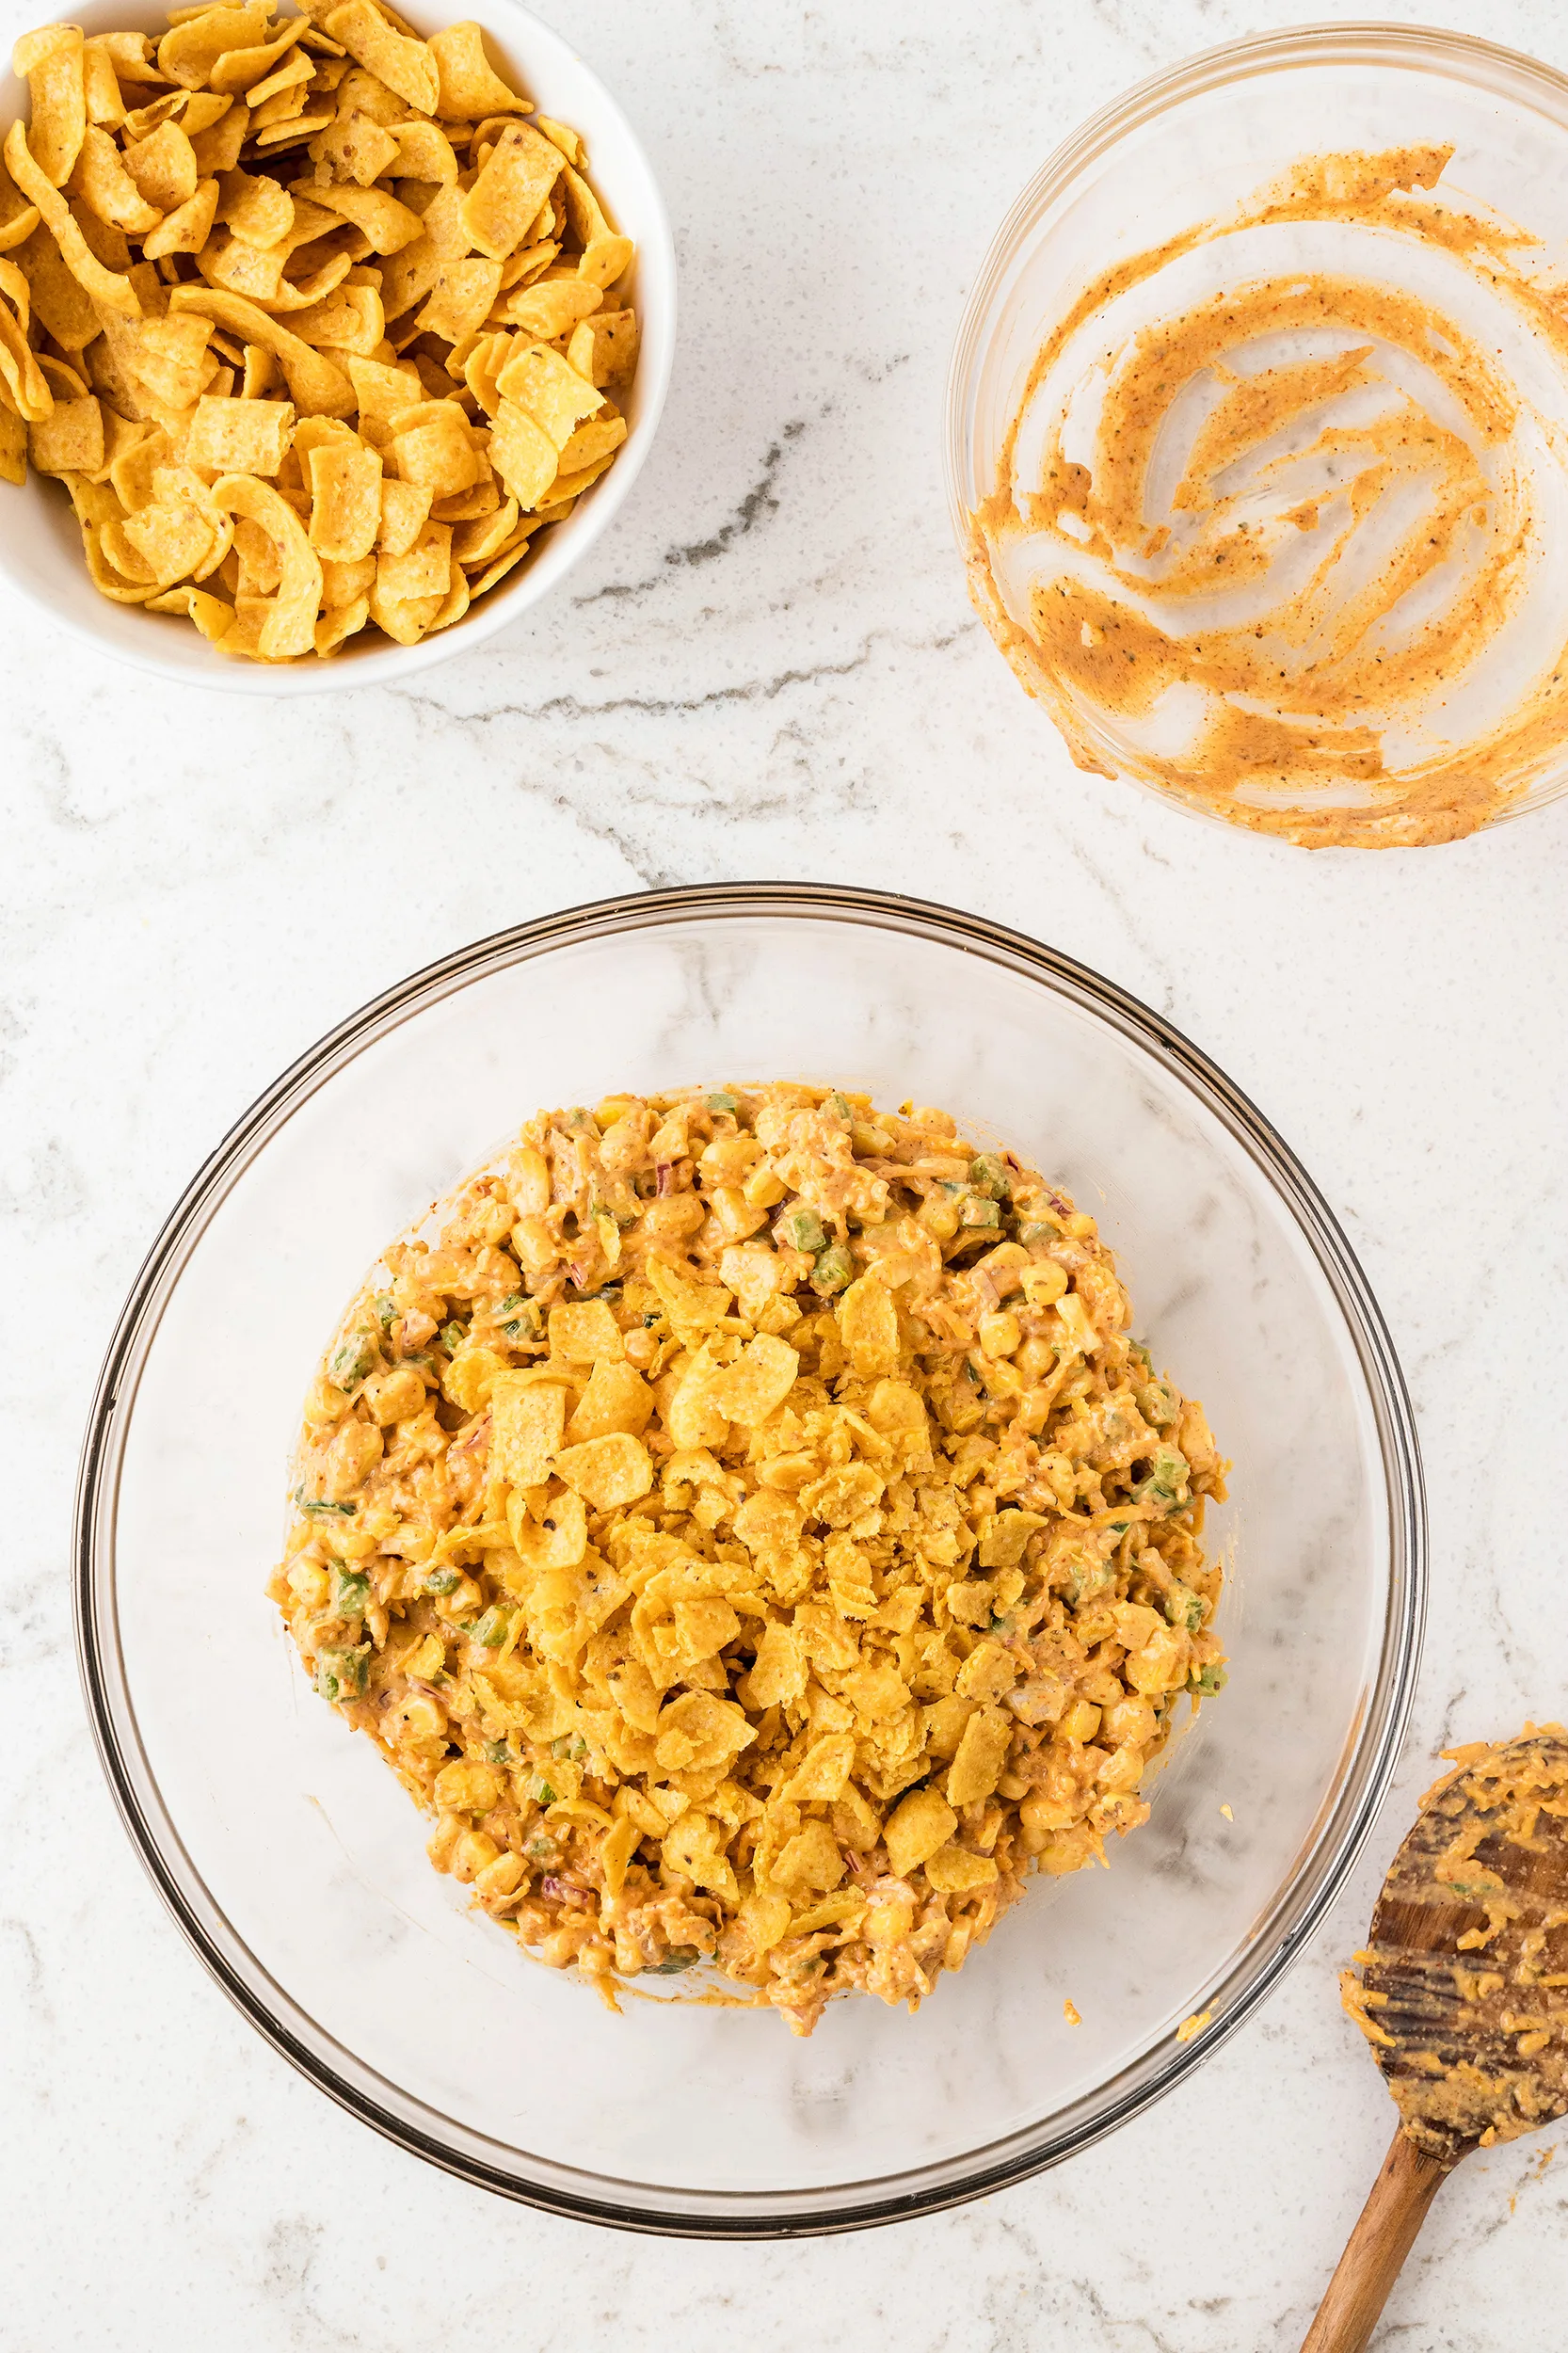 easy frito corn salad recipe with the corn chips about to be mixed in